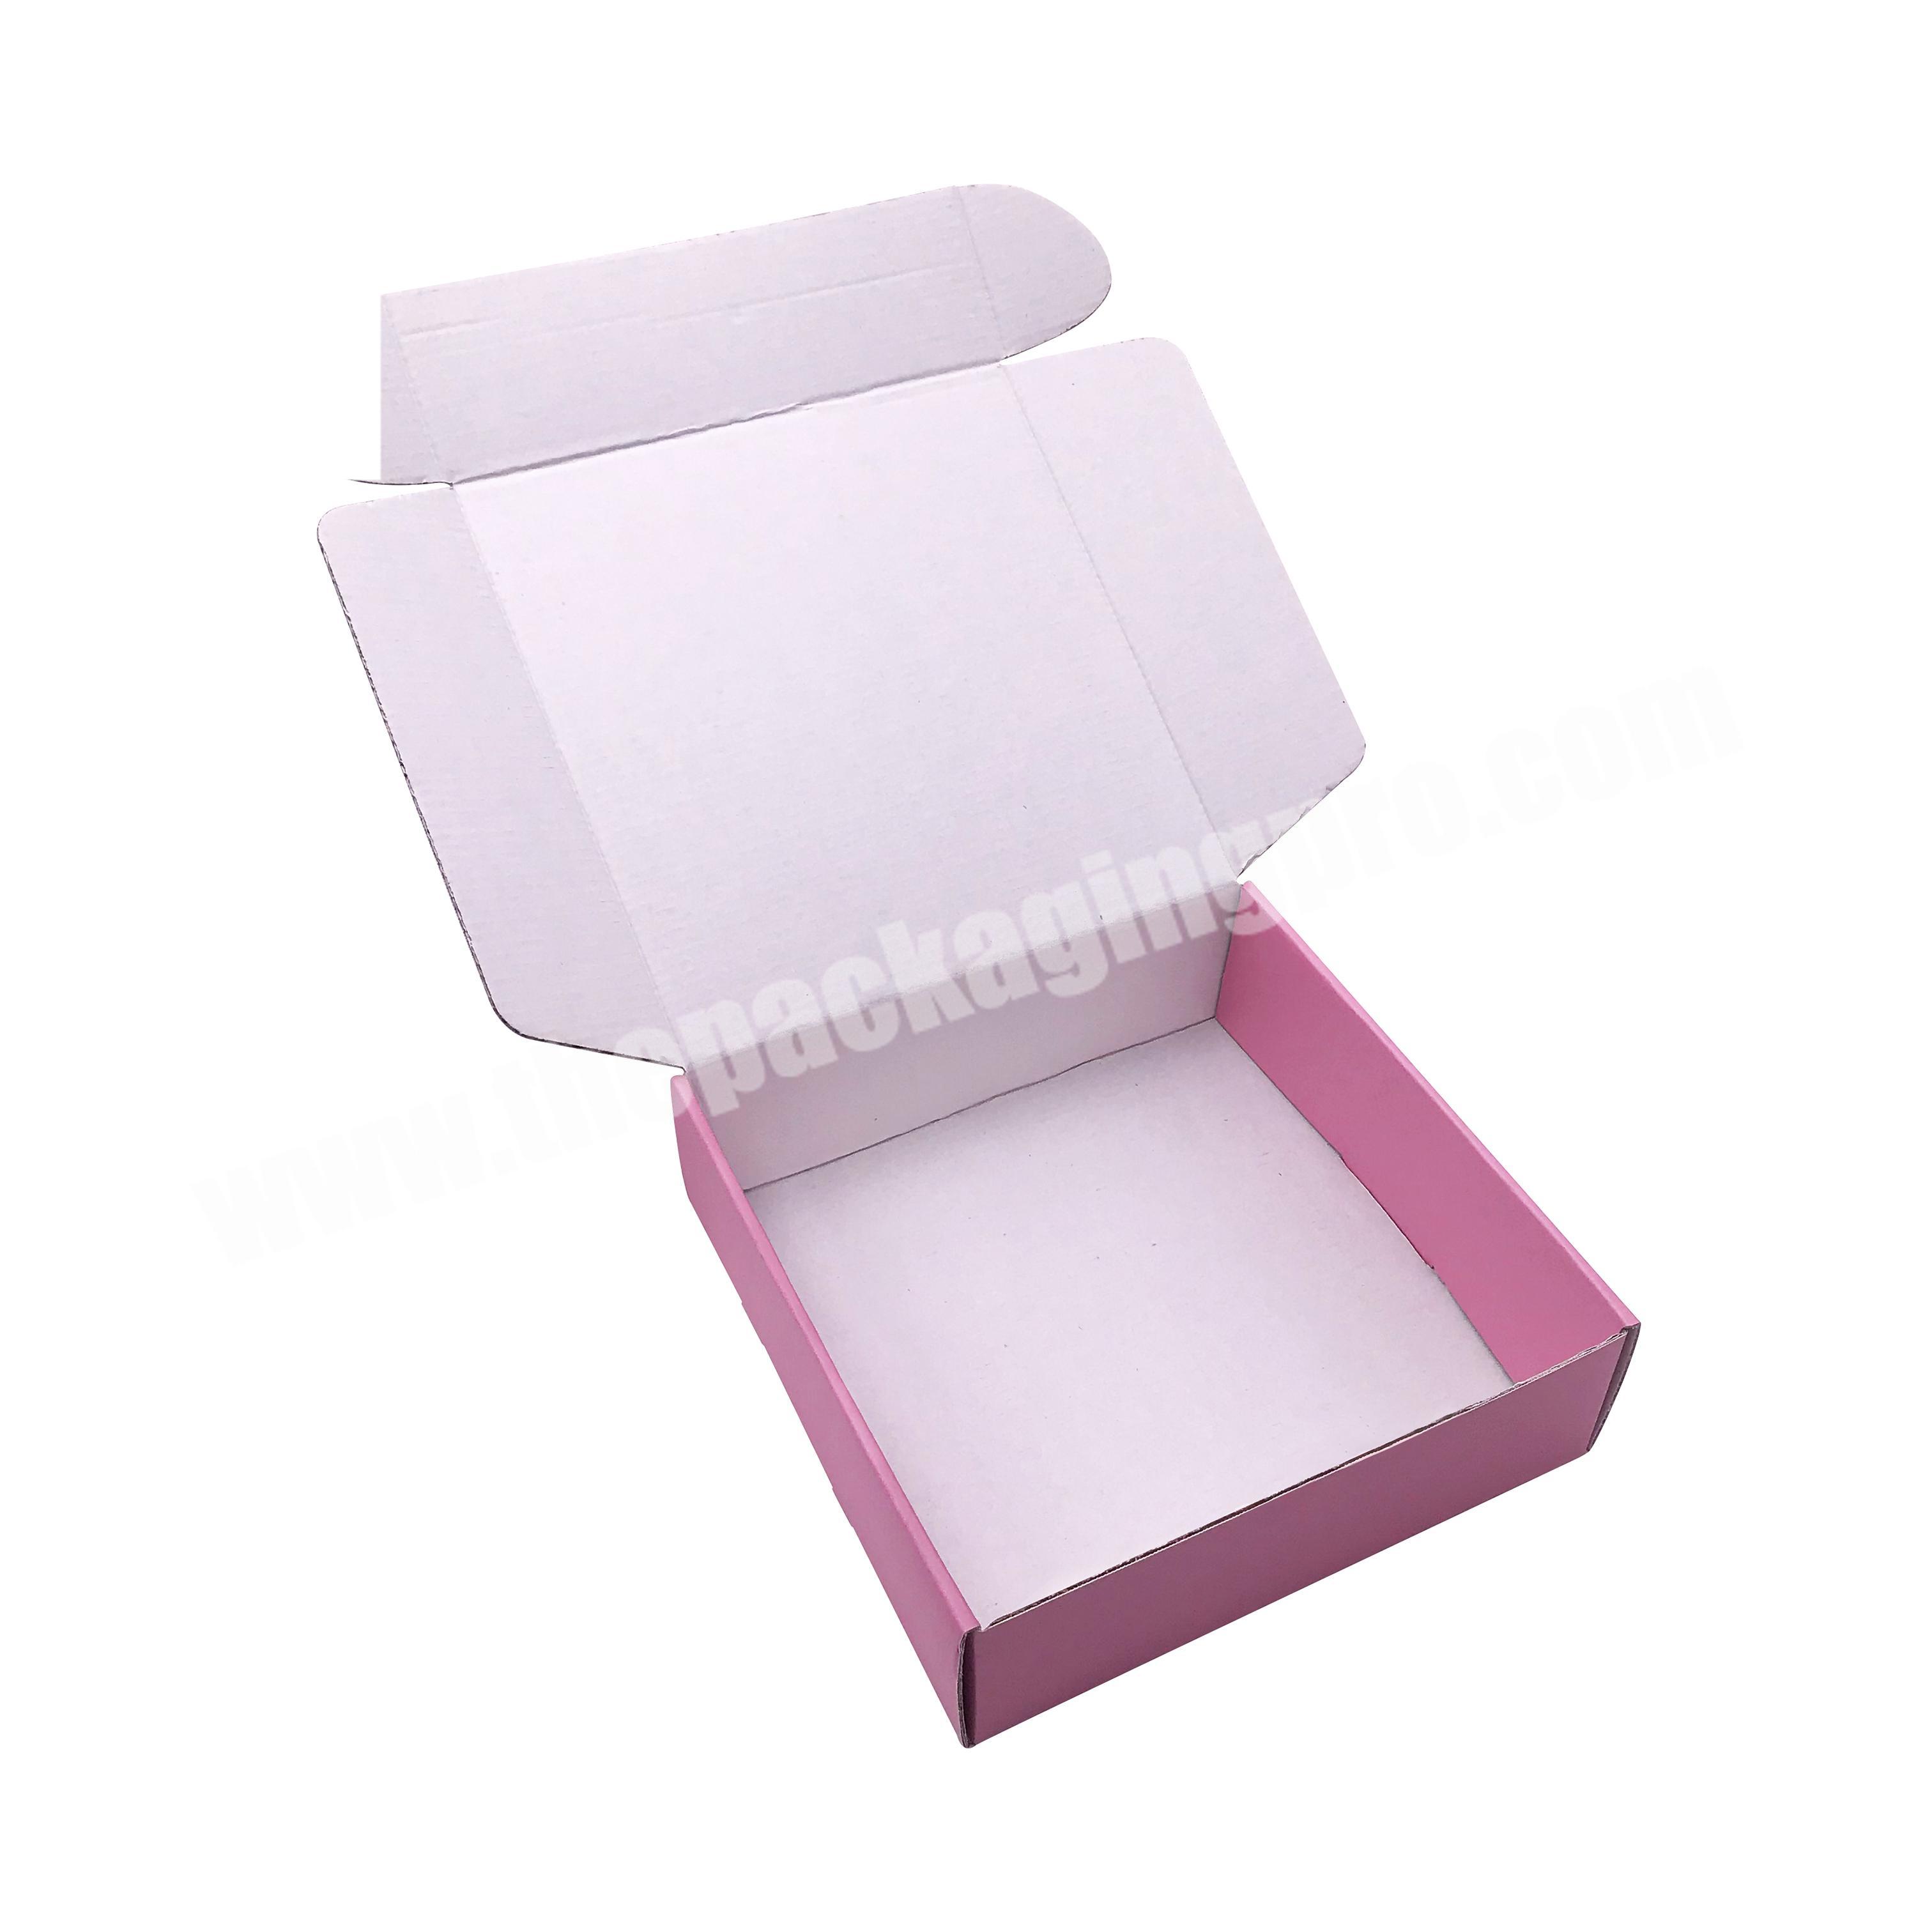 Evening dress paper box packagingCosmetic gift box with ribbon swimwear magnetic bridesmaid gift box with shredded paper